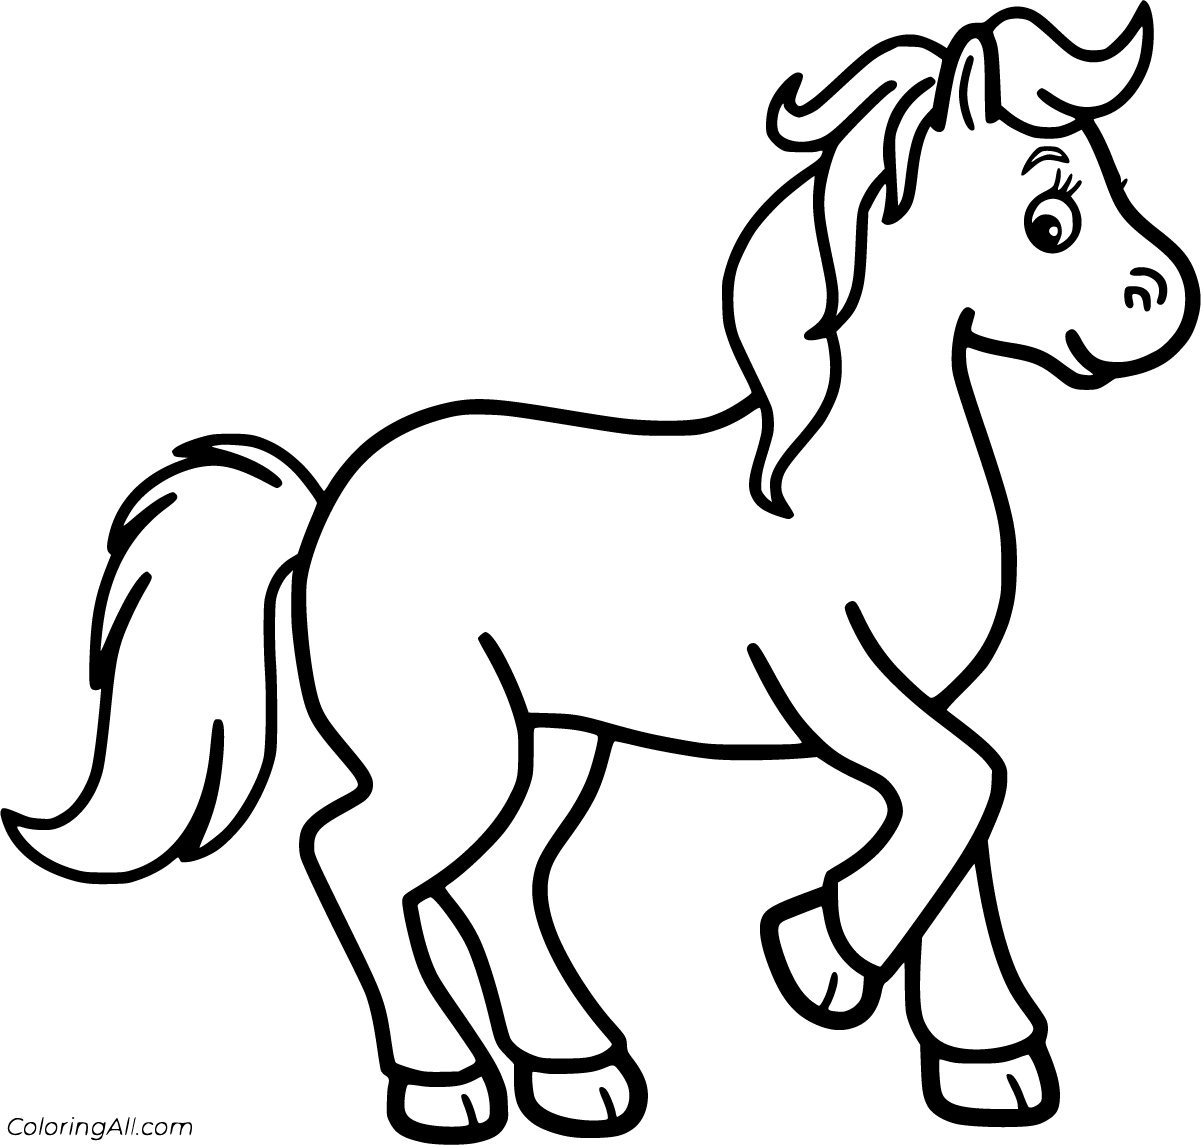 Download Horse Coloring Pages - ColoringAll